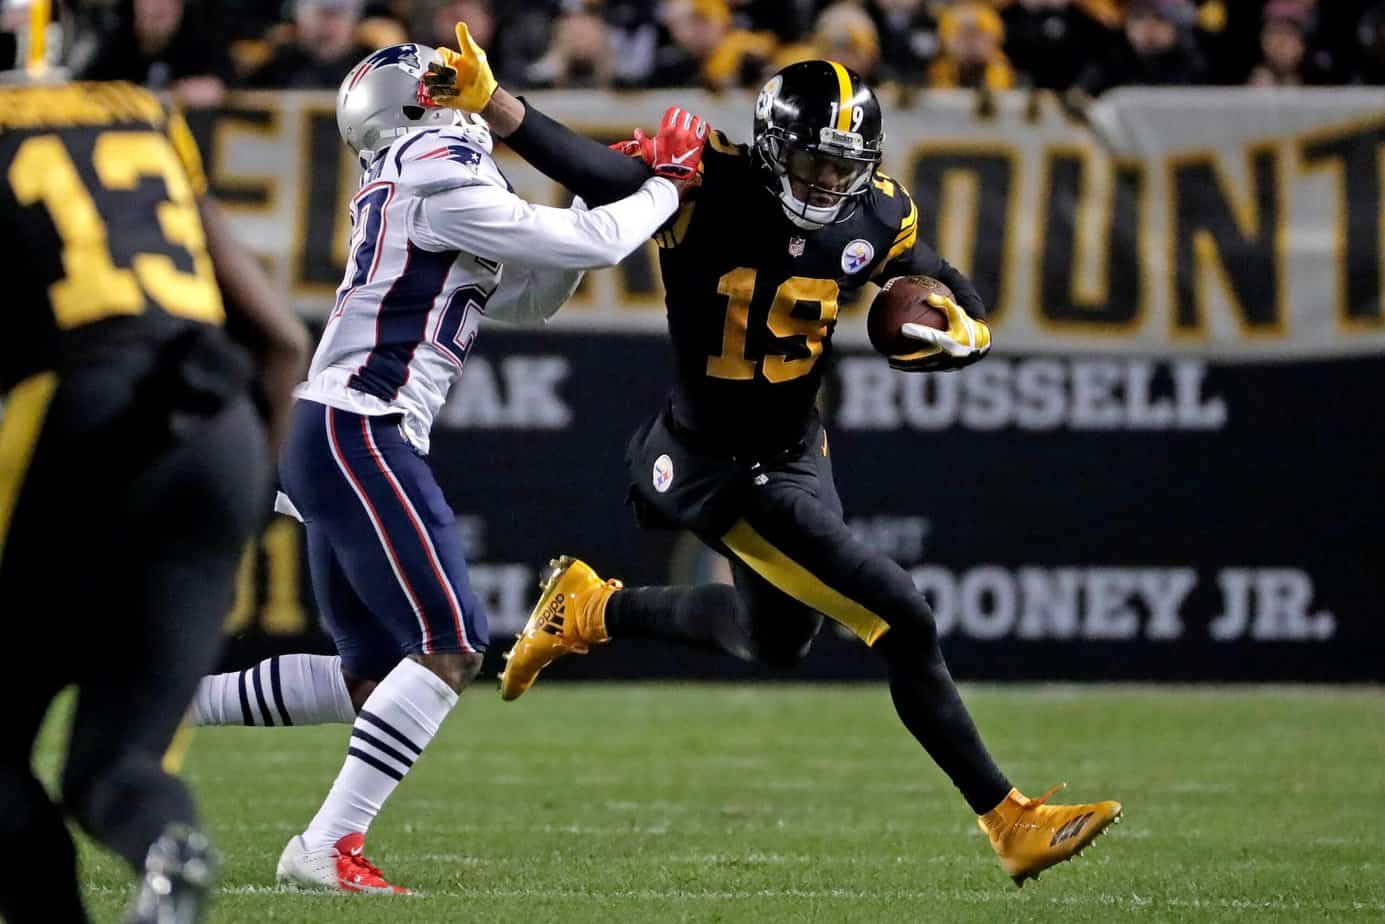 Patriots at Steelers for TNF: Preview and Free Pick